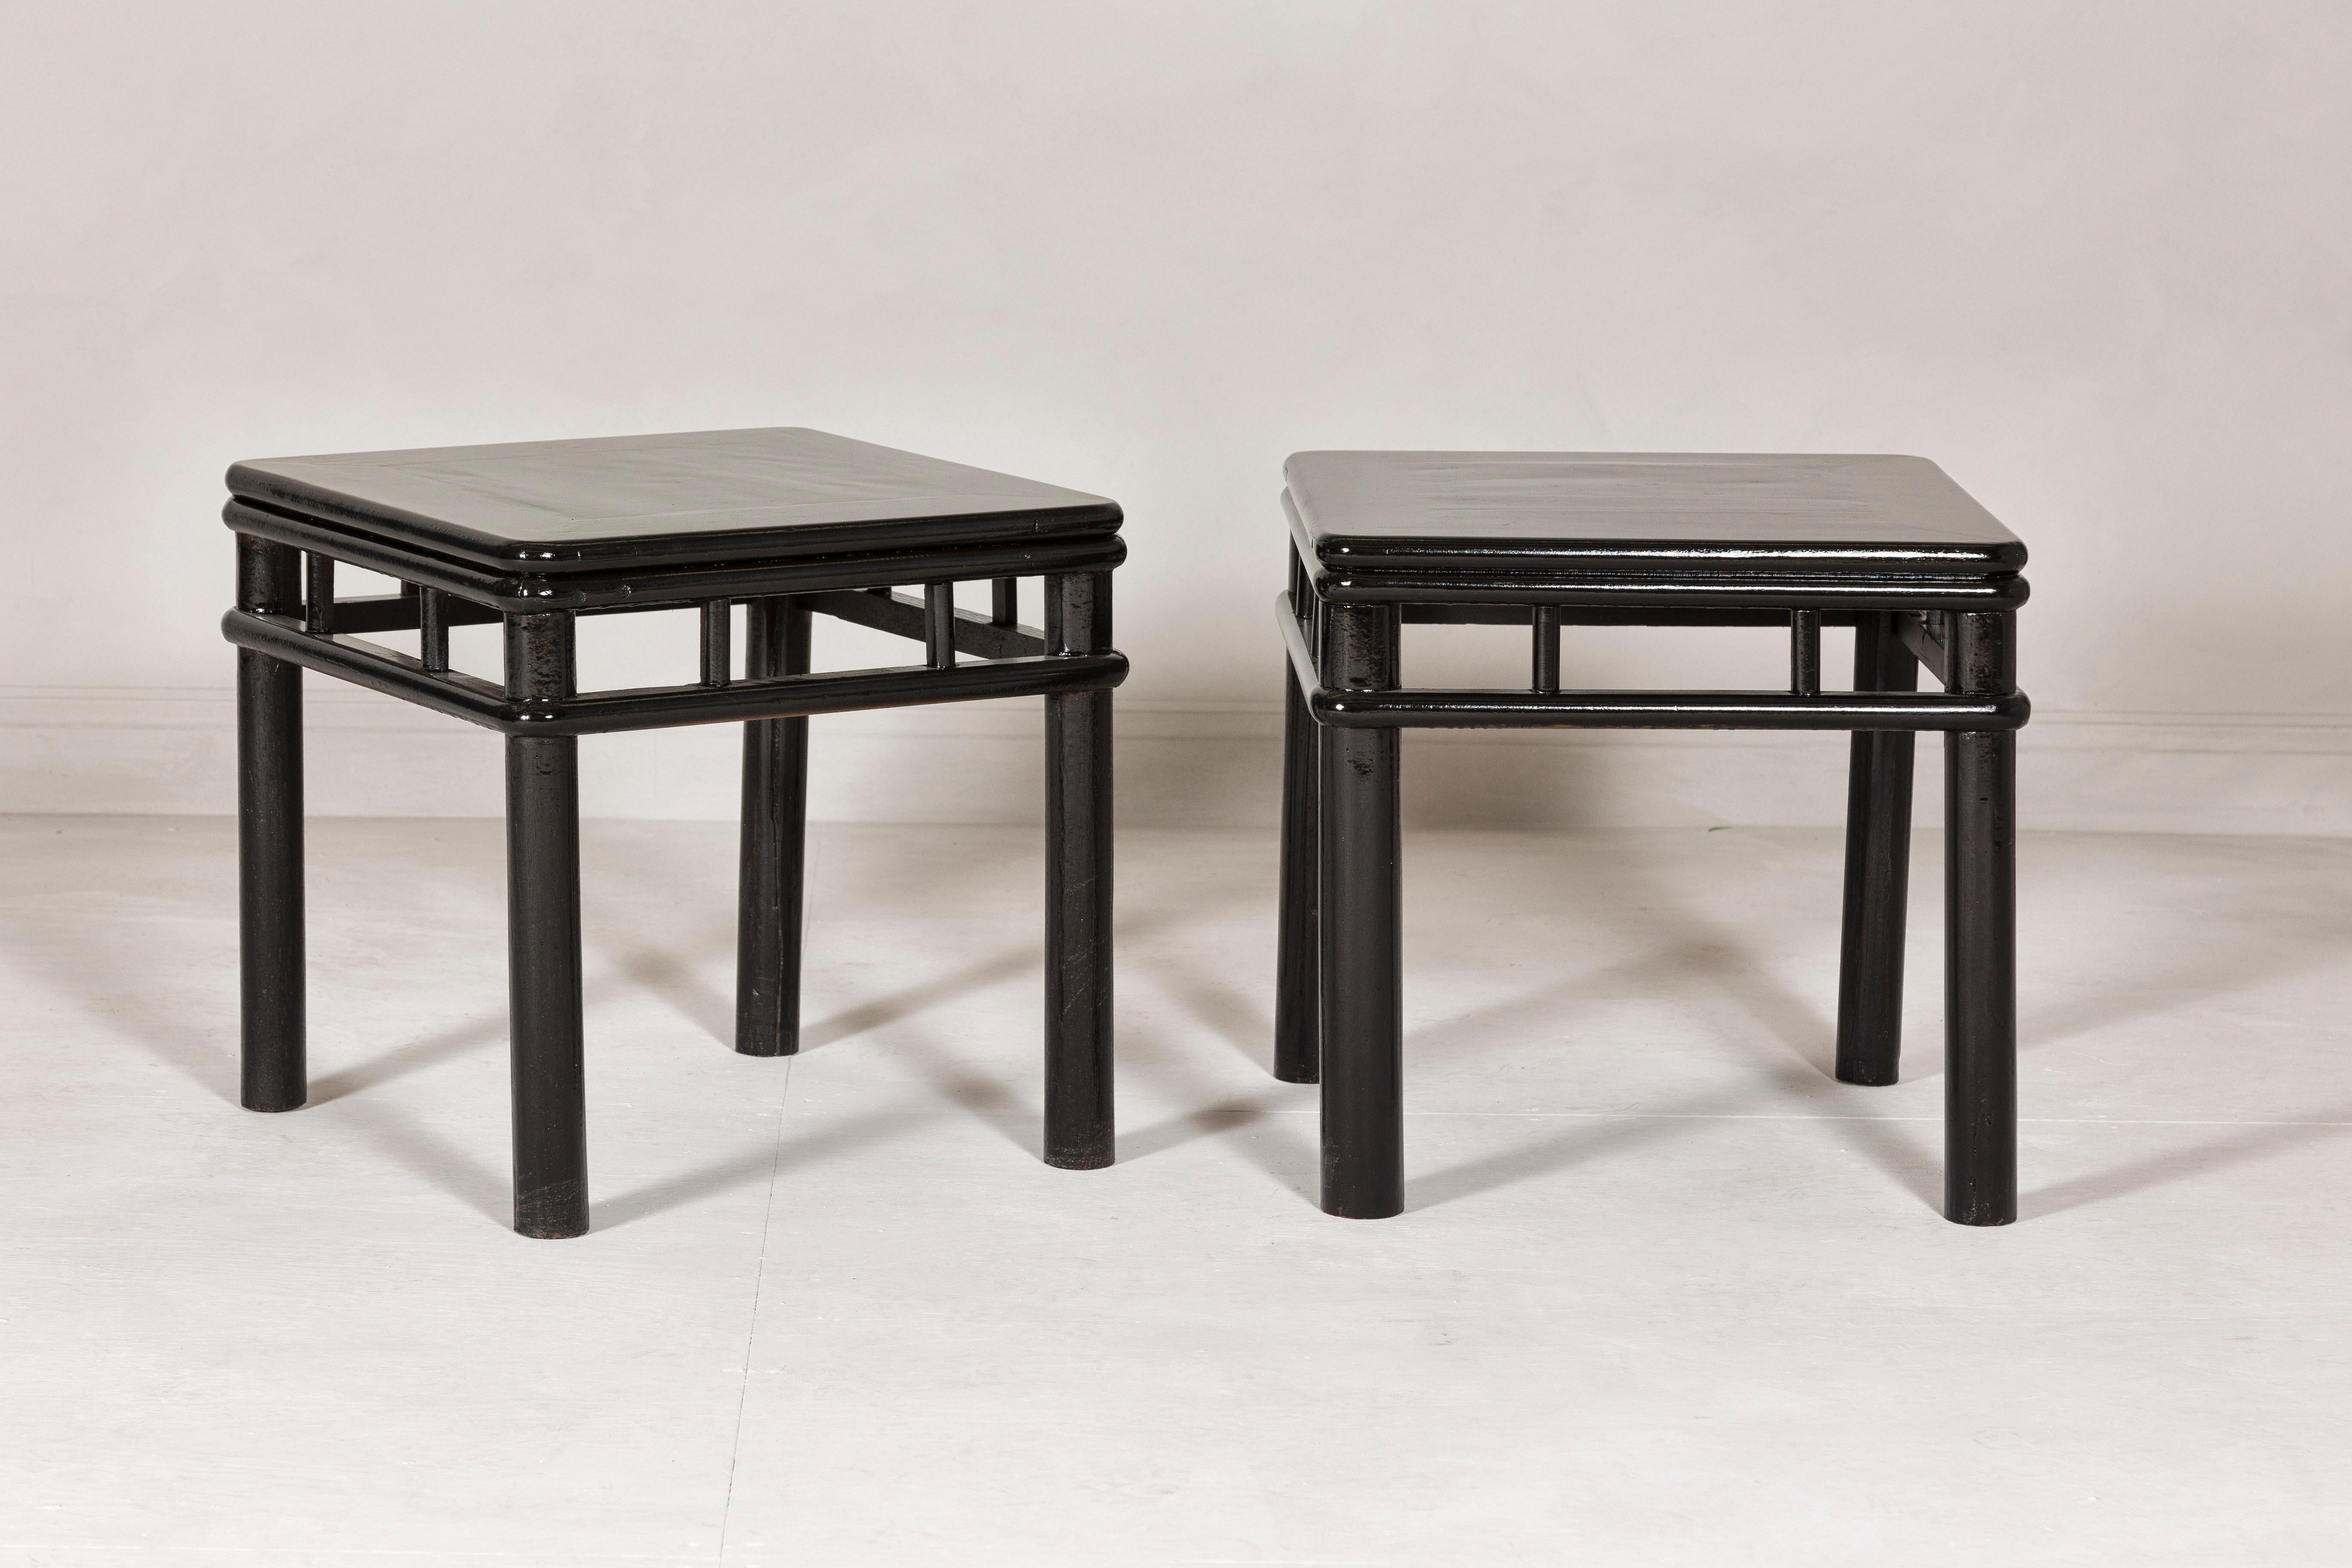 Pair of Black Lacquer Drinks Tables with Open Stretcher and Cylindrical Legs In Good Condition For Sale In Yonkers, NY